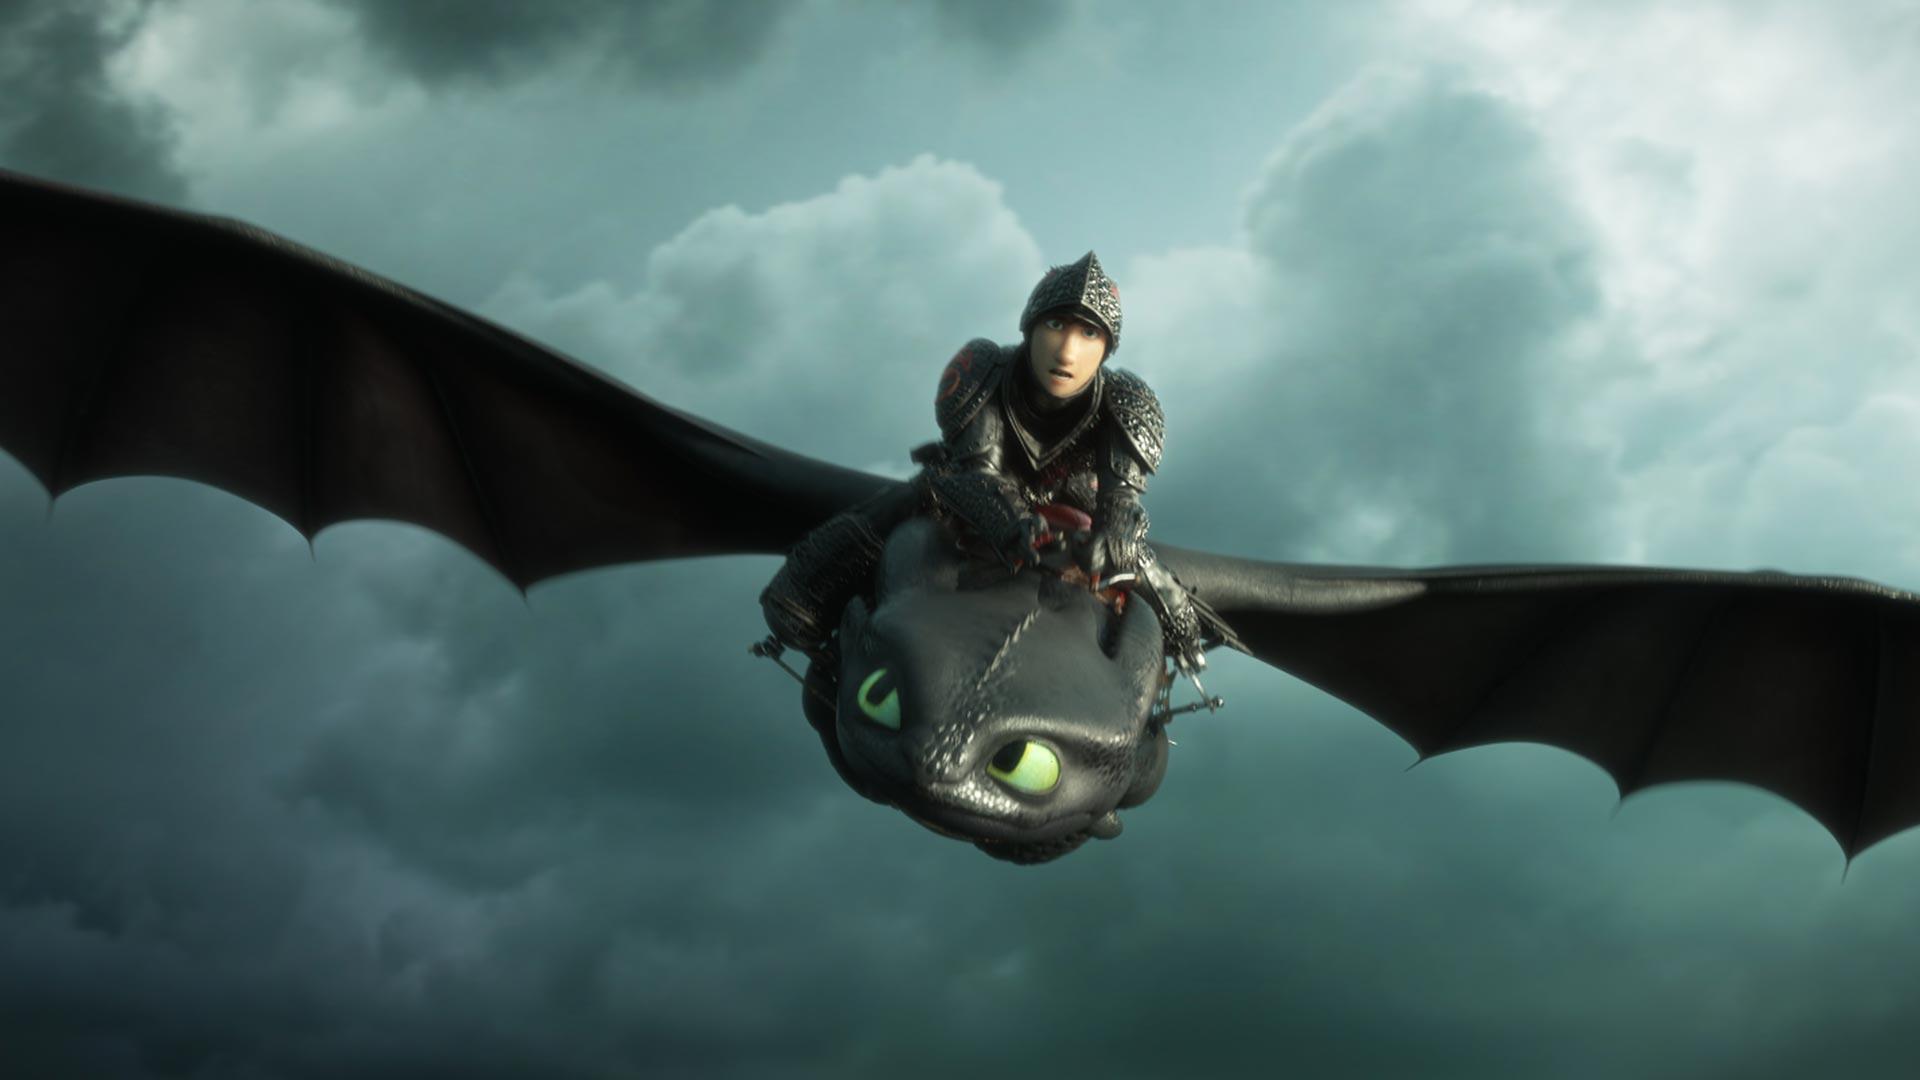 How To Train Your Dragon: The Hidden World trailer. Movies